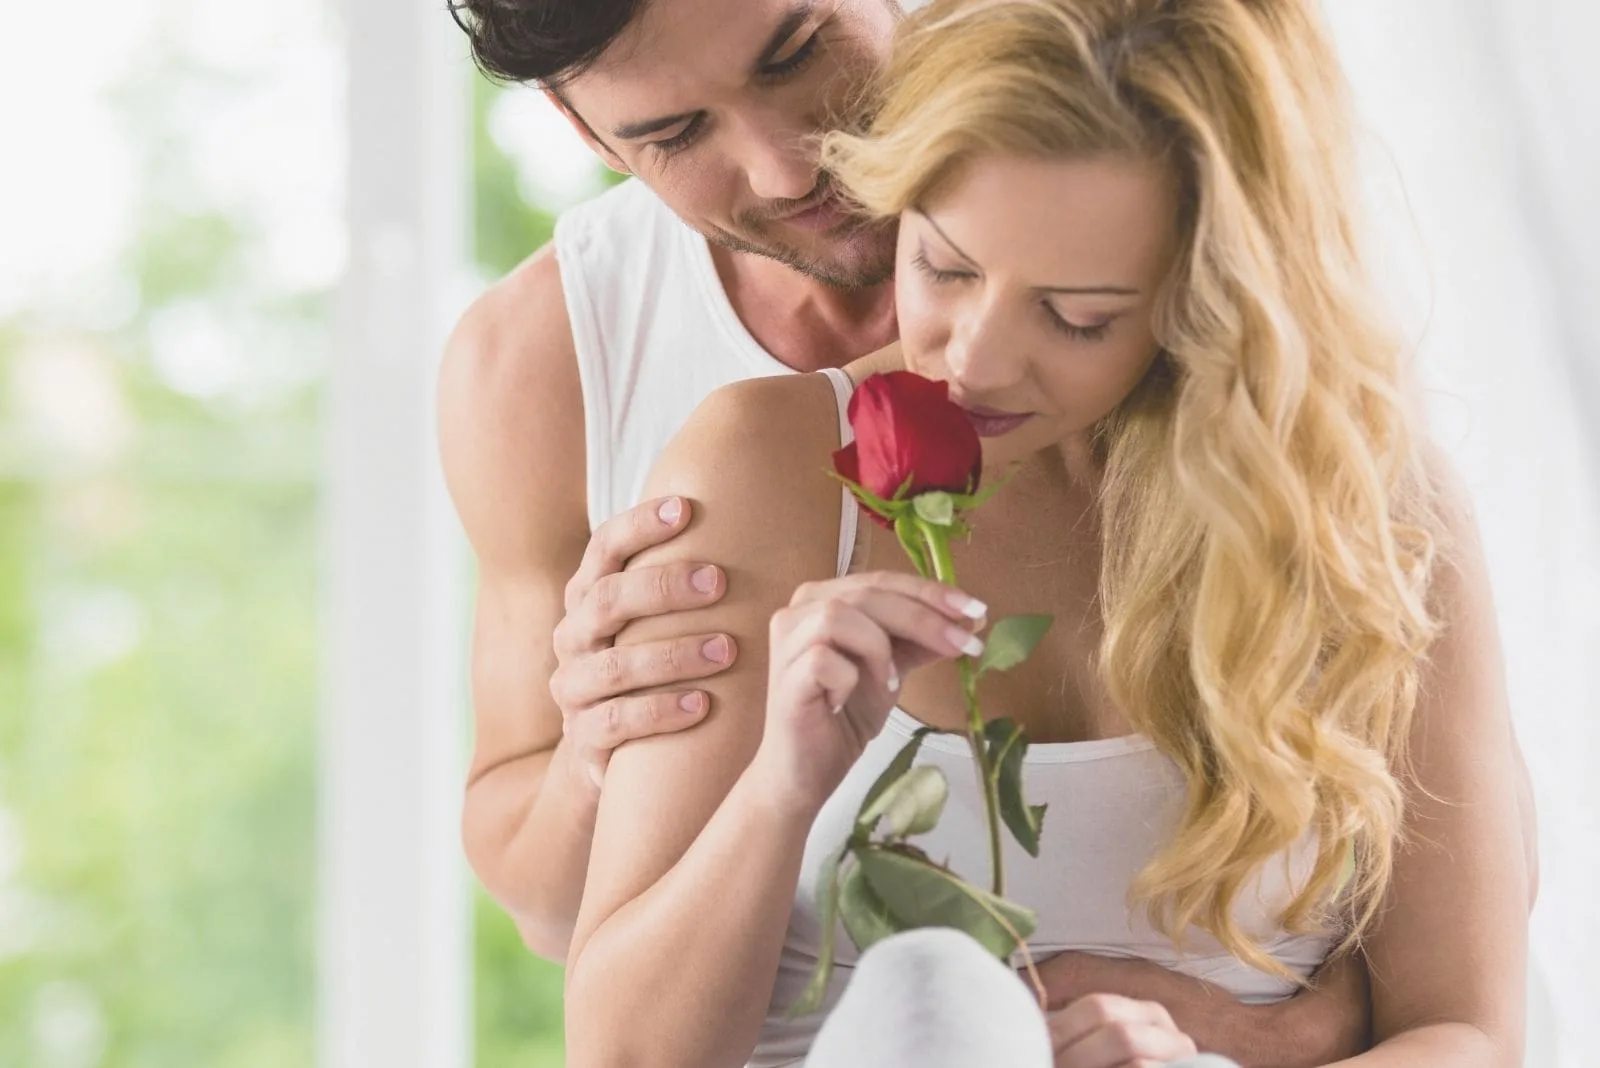 woman smelling a rose given by his romantic husband hugging her